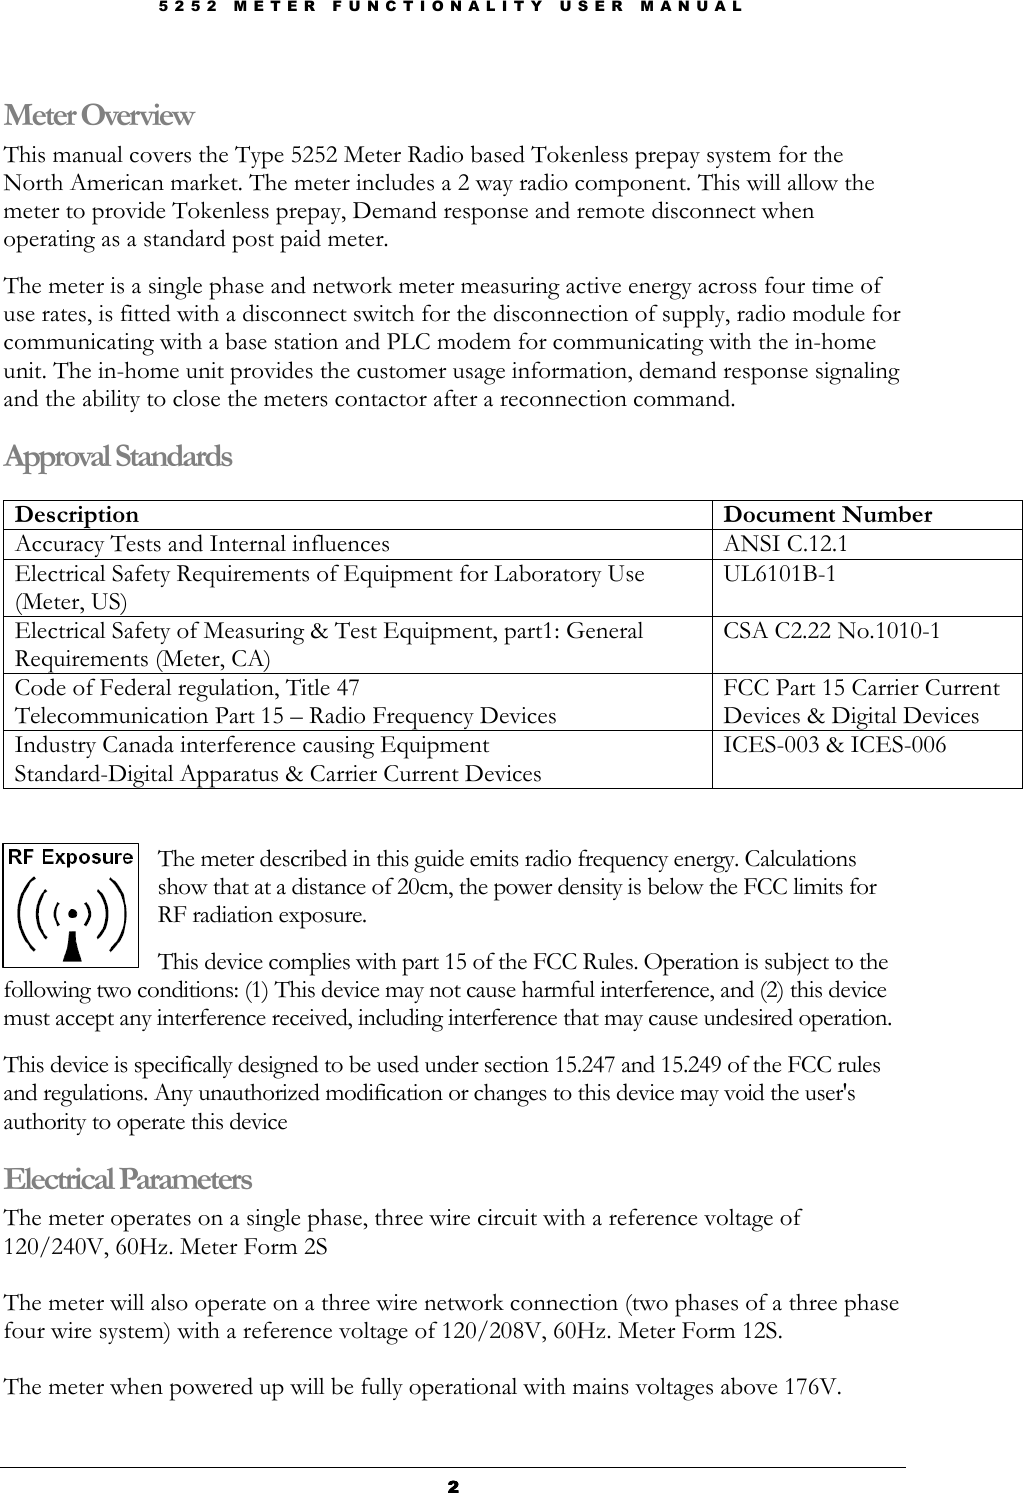 5 2 5 2   M E T E R   F U N C T I O N A L I T Y   U S E R   M A N U A L  2222 Meter Overview This manual covers the Type 5252 Meter Radio based Tokenless prepay system for the North American market. The meter includes a 2 way radio component. This will allow the meter to provide Tokenless prepay, Demand response and remote disconnect when operating as a standard post paid meter.     The meter is a single phase and network meter measuring active energy across four time of use rates, is fitted with a disconnect switch for the disconnection of supply, radio module for communicating with a base station and PLC modem for communicating with the in-home unit. The in-home unit provides the customer usage information, demand response signaling and the ability to close the meters contactor after a reconnection command. Approval Standards  Description   Document Number Accuracy Tests and Internal influences  ANSI C.12.1  Electrical Safety Requirements of Equipment for Laboratory Use (Meter, US) UL6101B-1  Electrical Safety of Measuring &amp; Test Equipment, part1: General Requirements (Meter, CA) CSA C2.22 No.1010-1 Code of Federal regulation, Title 47 Telecommunication Part 15 – Radio Frequency Devices FCC Part 15 Carrier Current Devices &amp; Digital Devices Industry Canada interference causing Equipment Standard-Digital Apparatus &amp; Carrier Current Devices ICES-003 &amp; ICES-006   The meter described in this guide emits radio frequency energy. Calculations show that at a distance of 20cm, the power density is below the FCC limits for RF radiation exposure.   This device complies with part 15 of the FCC Rules. Operation is subject to the following two conditions: (1) This device may not cause harmful interference, and (2) this device must accept any interference received, including interference that may cause undesired operation.   This device is specifically designed to be used under section 15.247 and 15.249 of the FCC rules and regulations. Any unauthorized modification or changes to this device may void the user&apos;s authority to operate this device Electrical Parameters The meter operates on a single phase, three wire circuit with a reference voltage of 120/240V, 60Hz. Meter Form 2S  The meter will also operate on a three wire network connection (two phases of a three phase four wire system) with a reference voltage of 120/208V, 60Hz. Meter Form 12S.   The meter when powered up will be fully operational with mains voltages above 176V.  